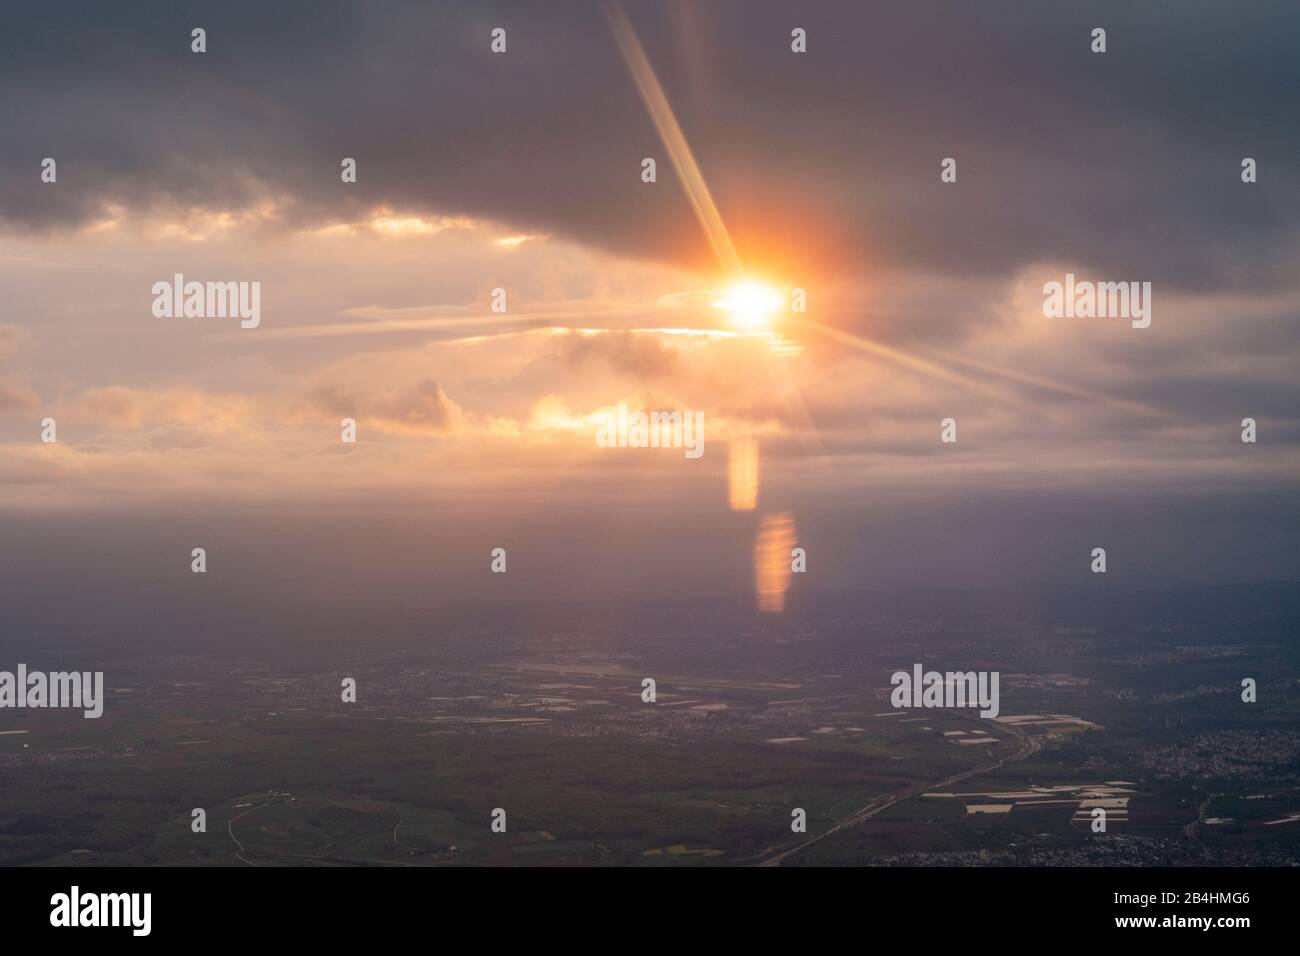 View from the window of an airplane at sunset with impressive light play over southern German landscape Stock Photo